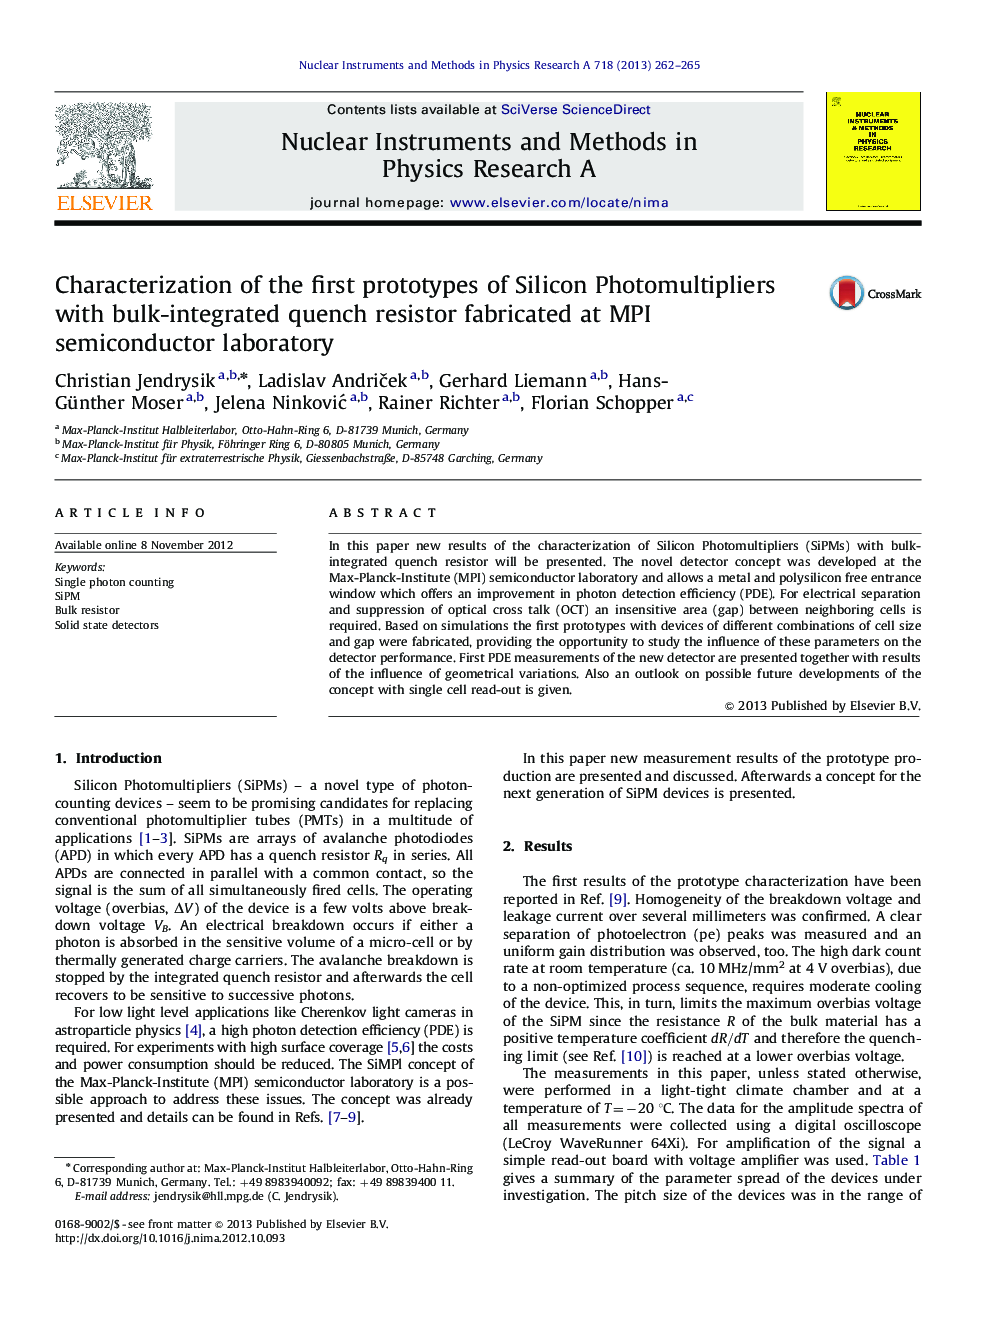 Characterization of the first prototypes of Silicon Photomultipliers with bulk-integrated quench resistor fabricated at MPI semiconductor laboratory